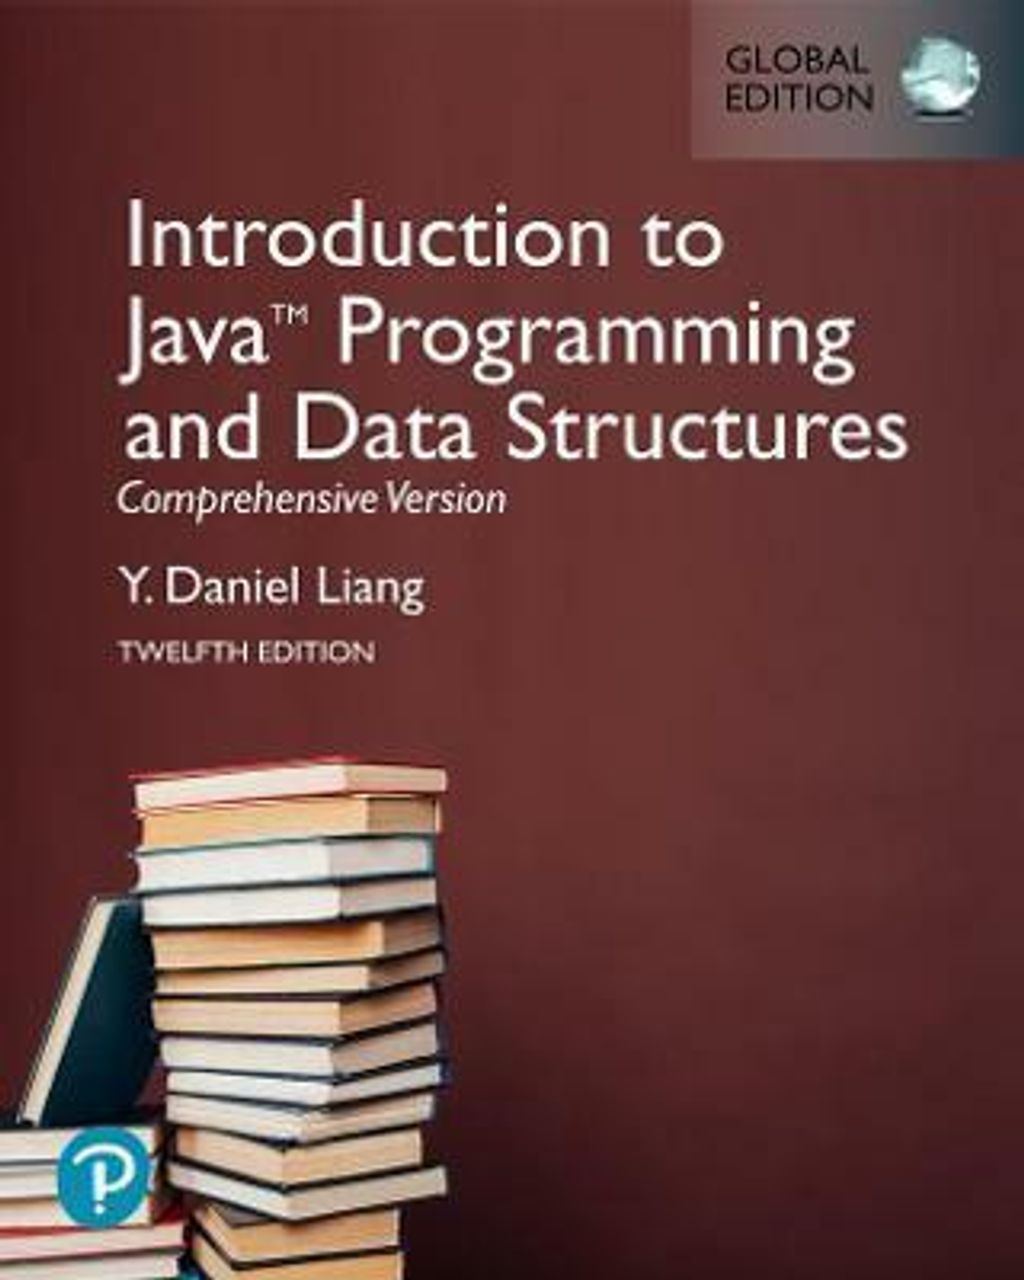 9781292402079 Introduction to Java Programming and Data Structures Liang 12E GE.jpg